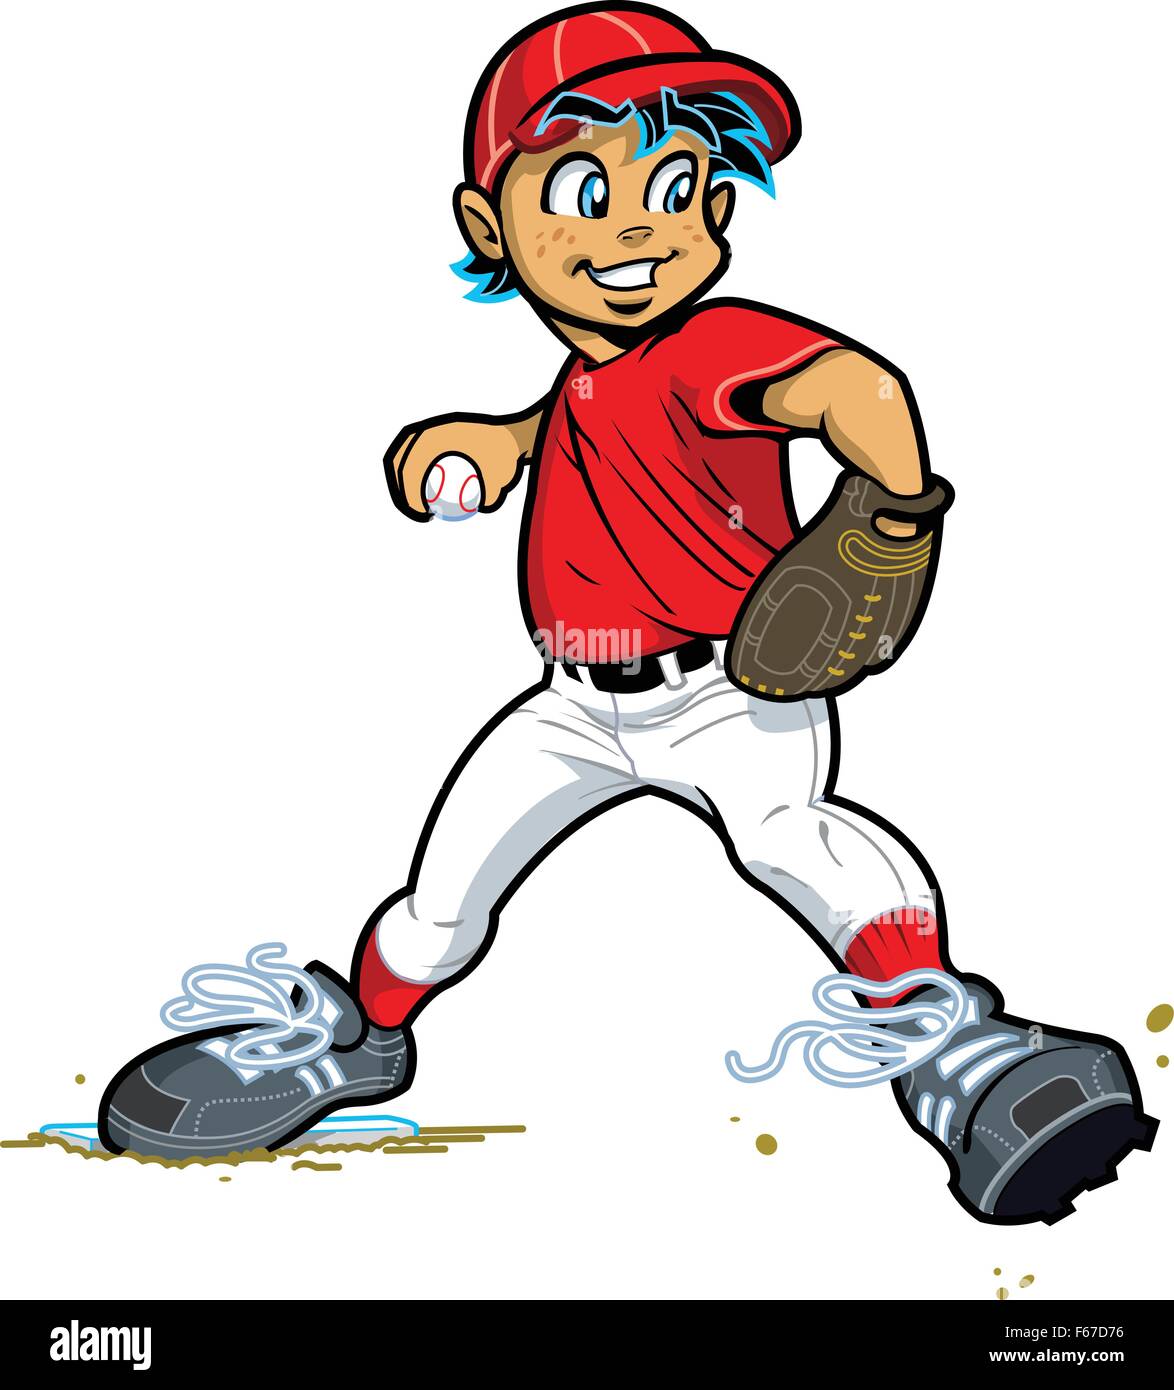 Baseball Player Pitcher Stock Illustrations – 4,271 Baseball Player Pitcher  Stock Illustrations, Vectors & Clipart - Dreamstime